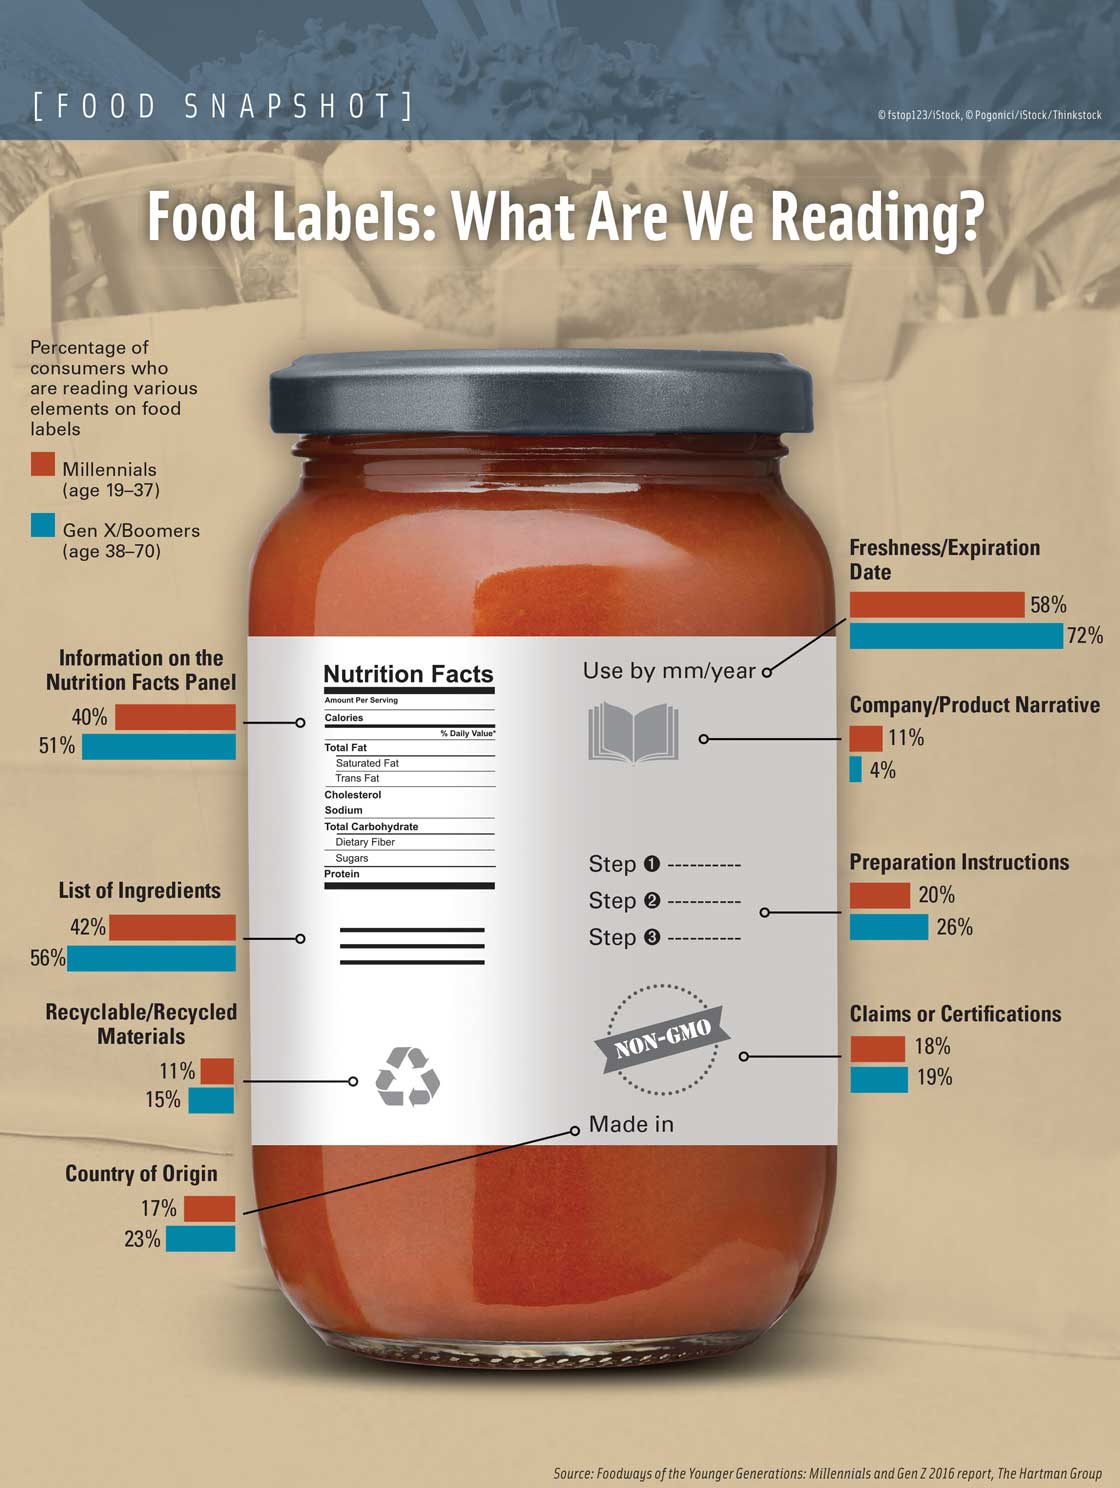 Food Labels: What Are We Reading?